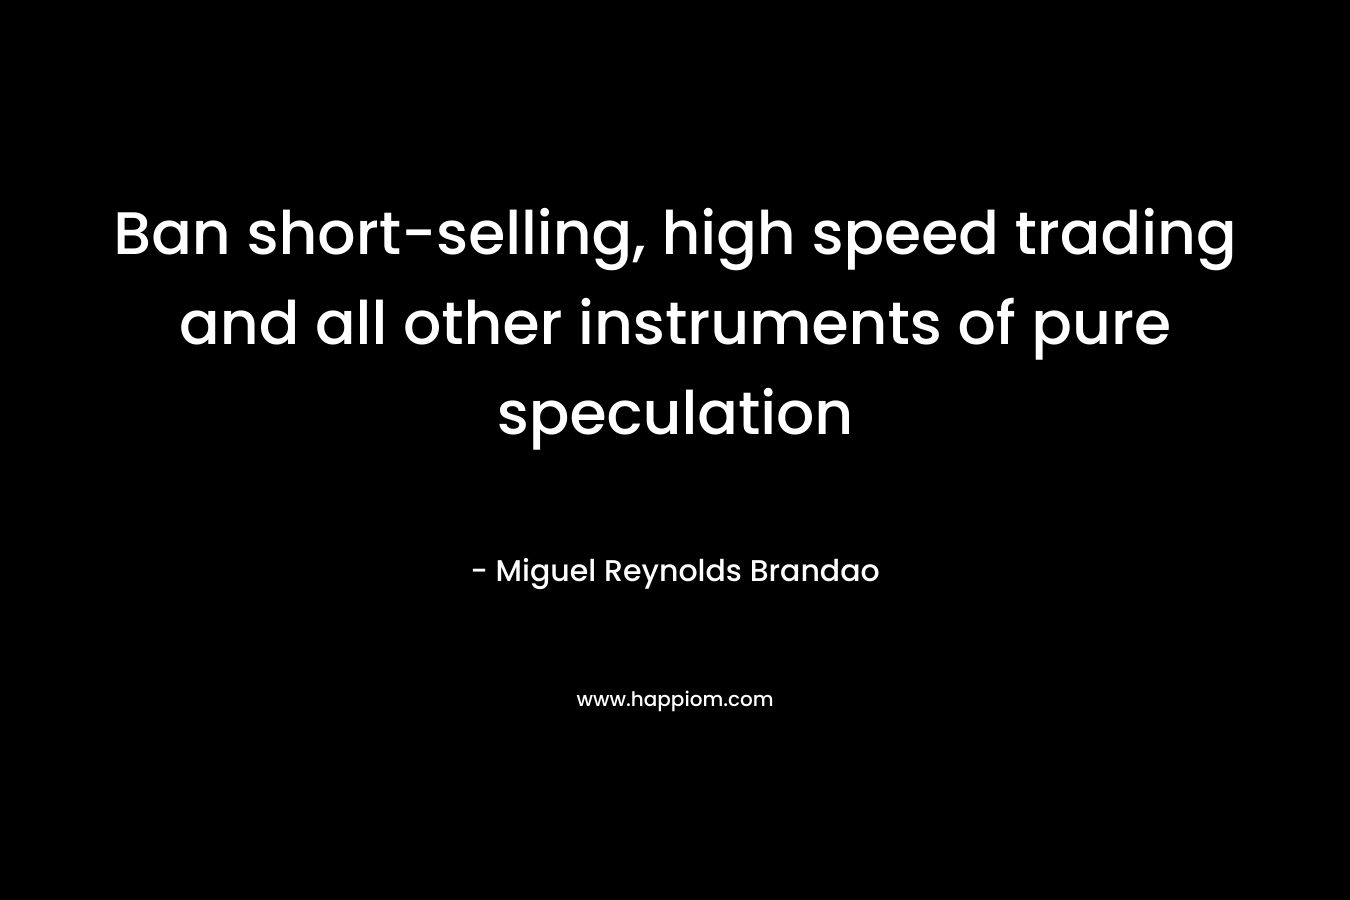 Ban short-selling, high speed trading and all other instruments of pure speculation